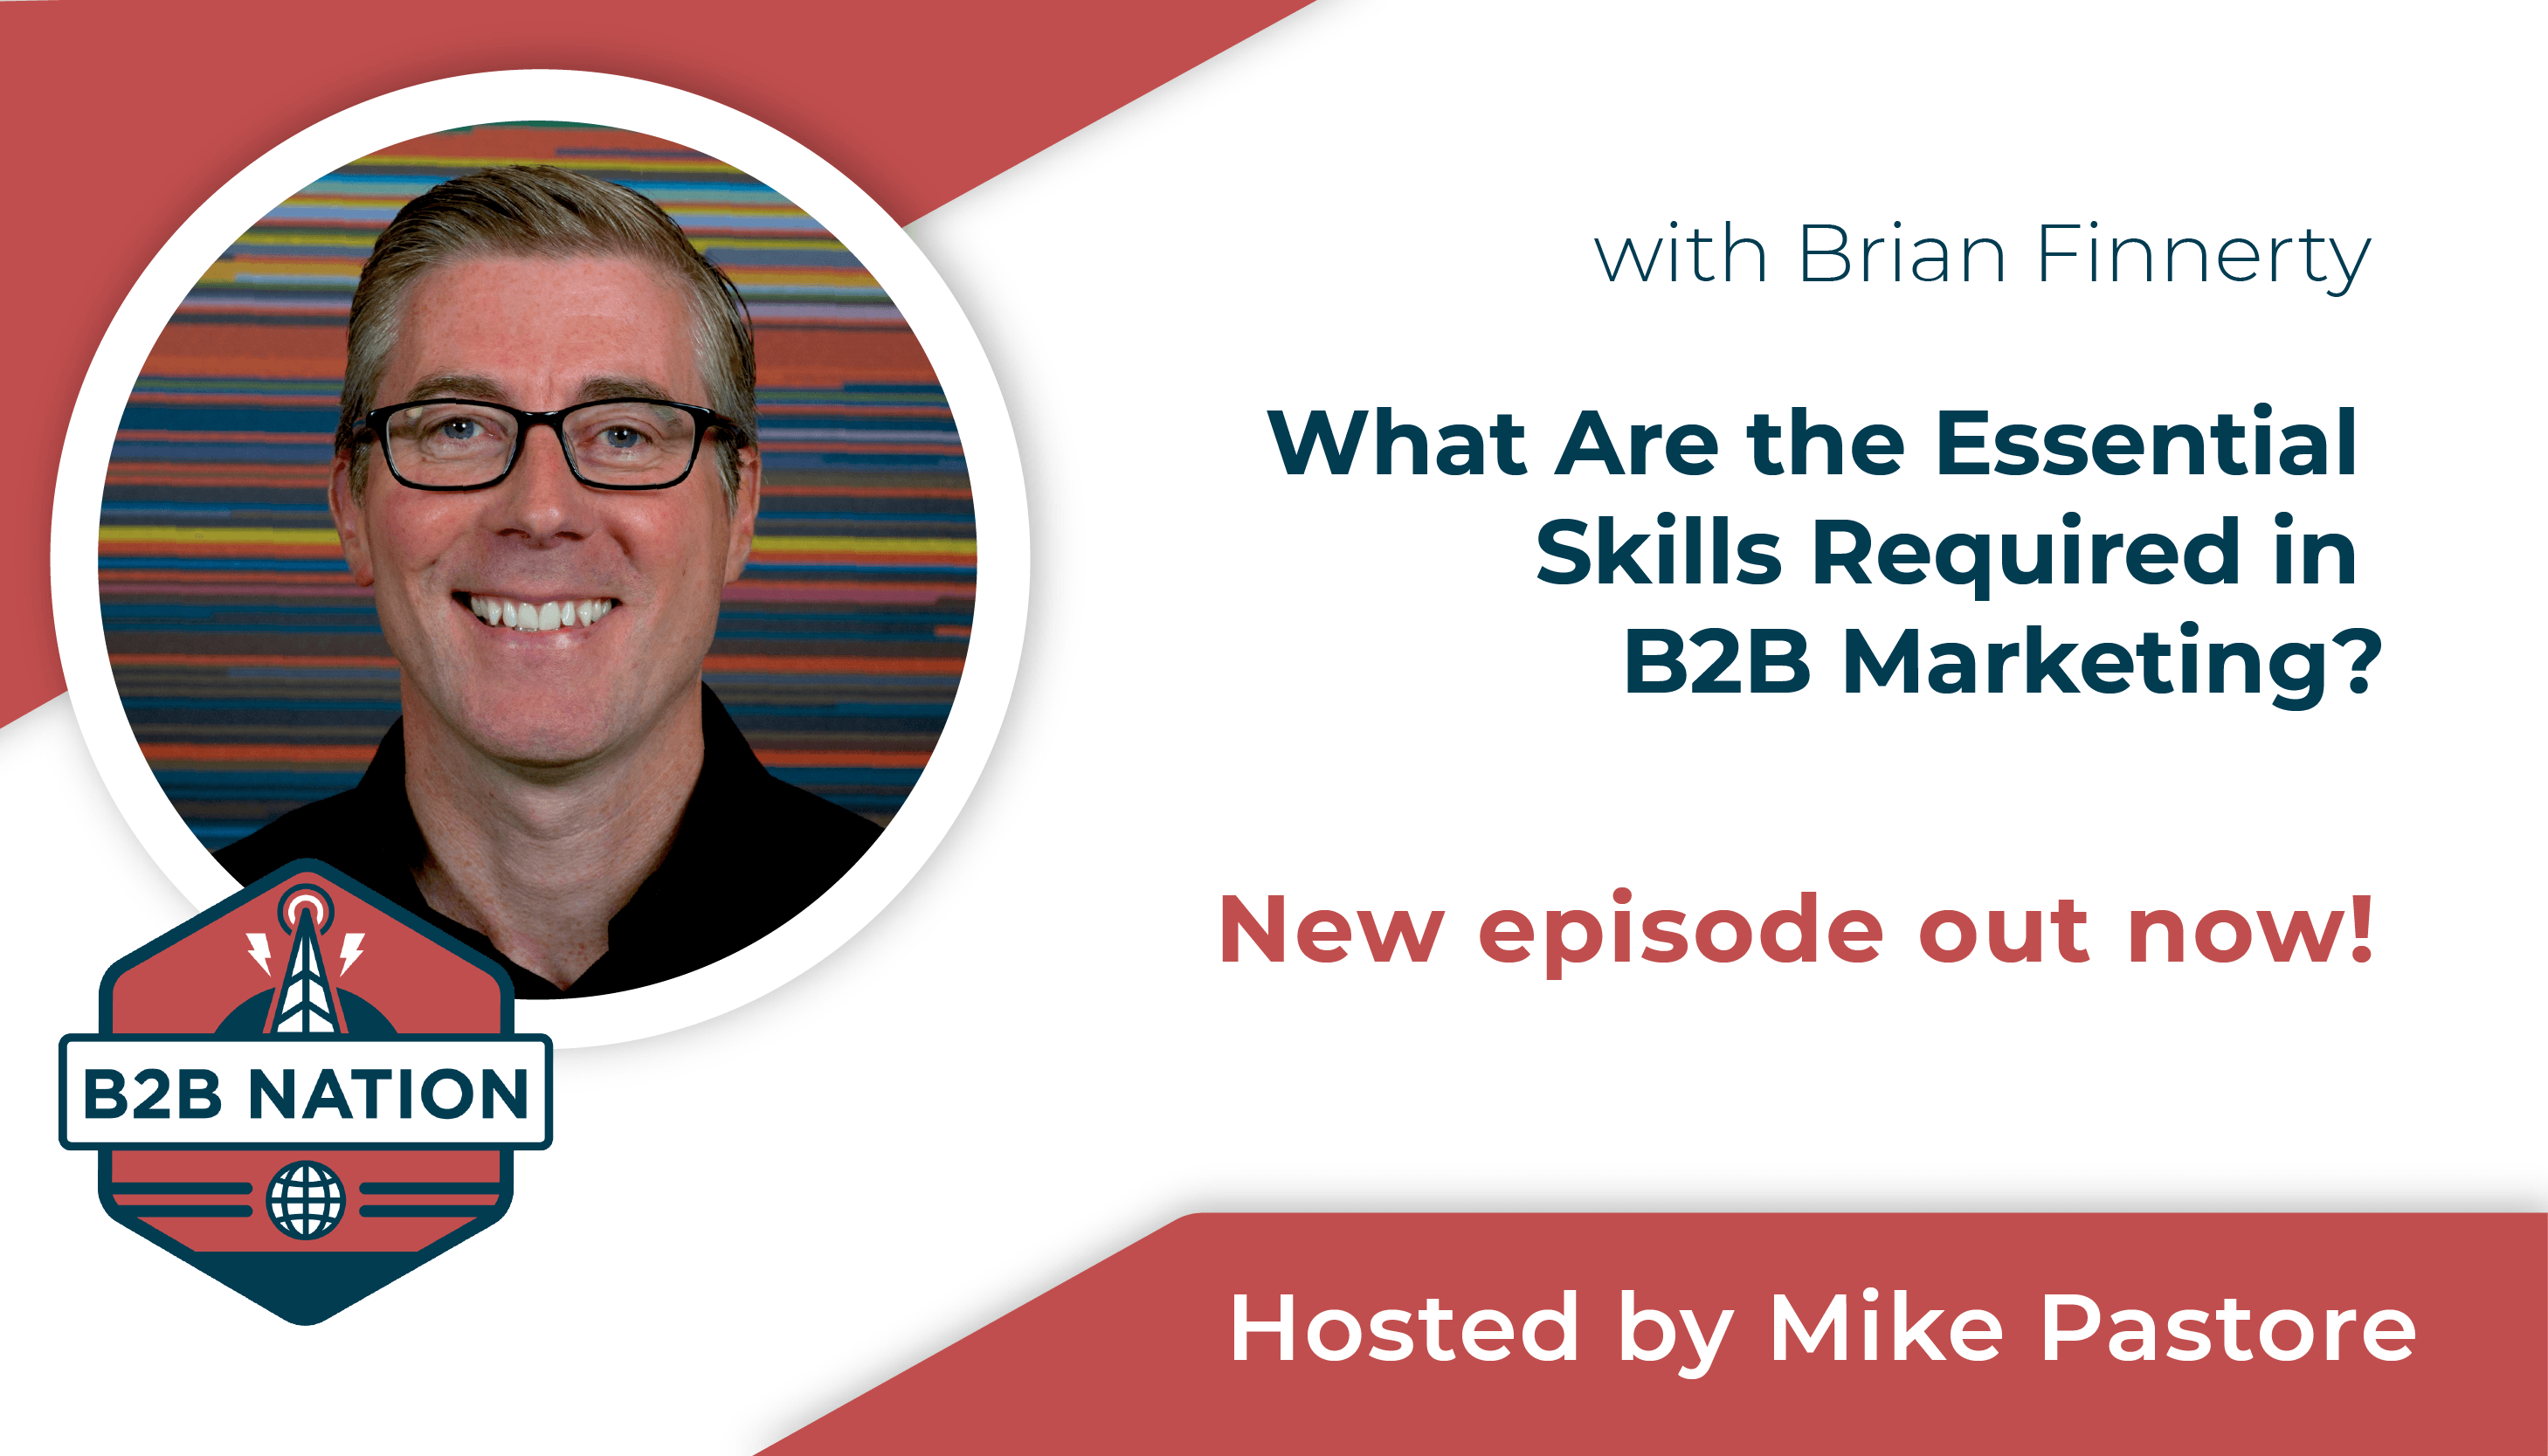 What Are the Essential Skills Required in B2B Marketing?